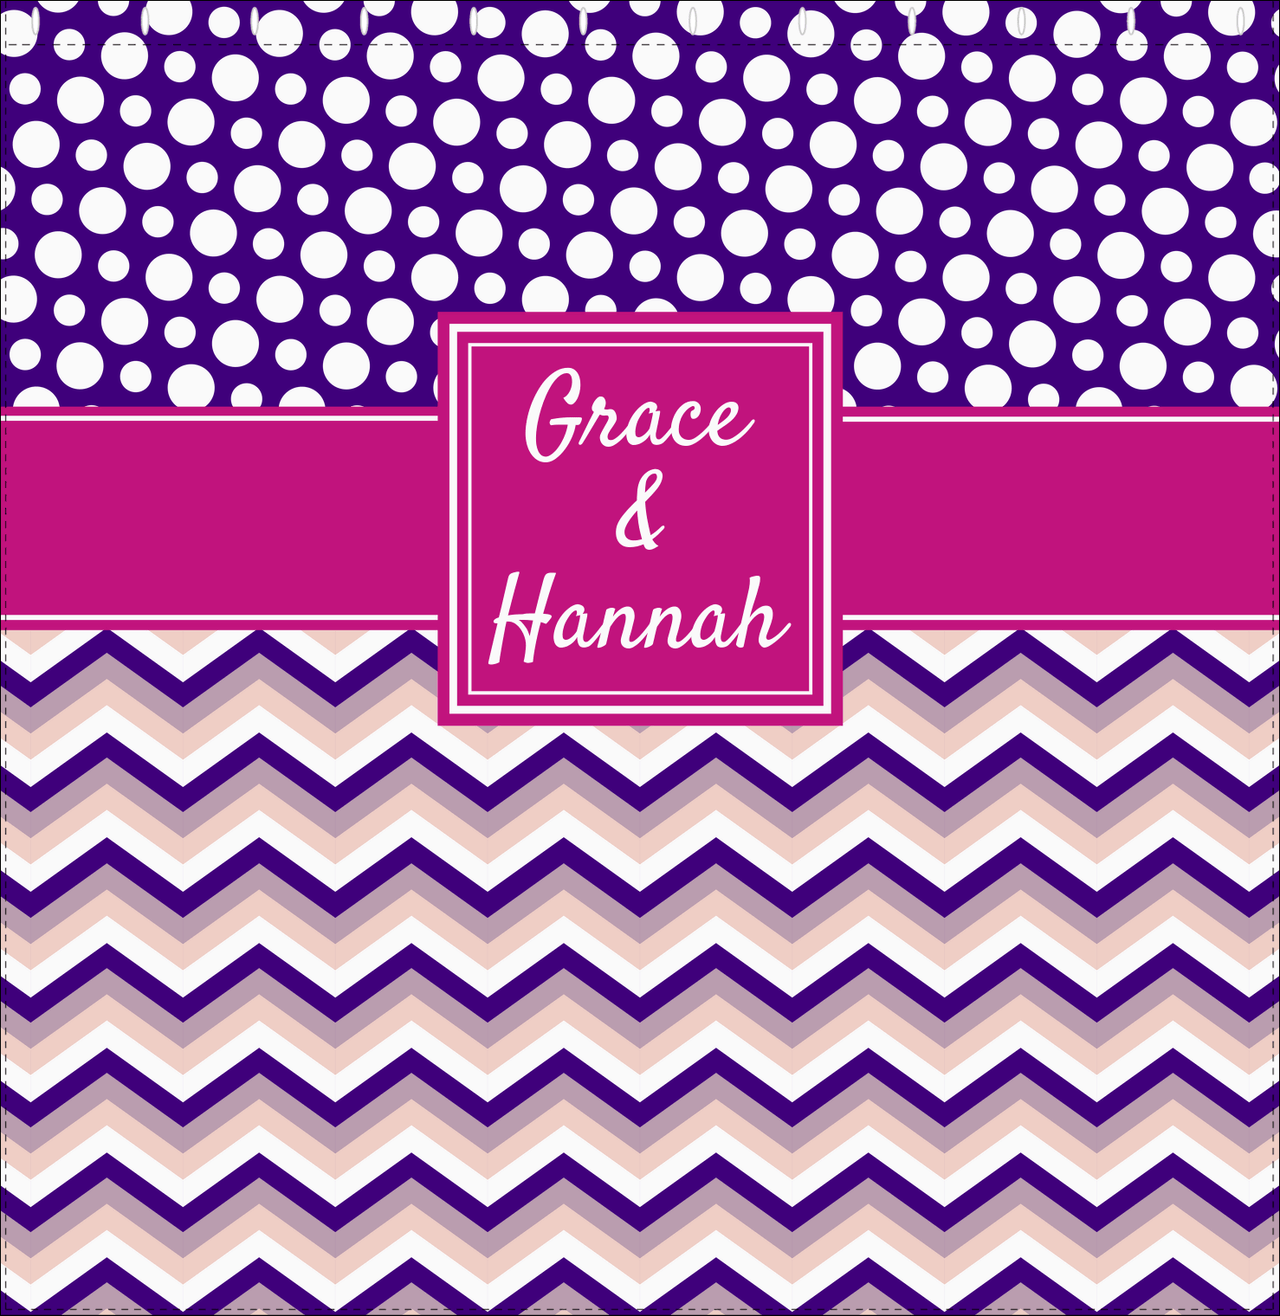 Personalized Polka Dots and Chevron IV Shower Curtain - Pink and Purple - Square Nameplate - Decorate View